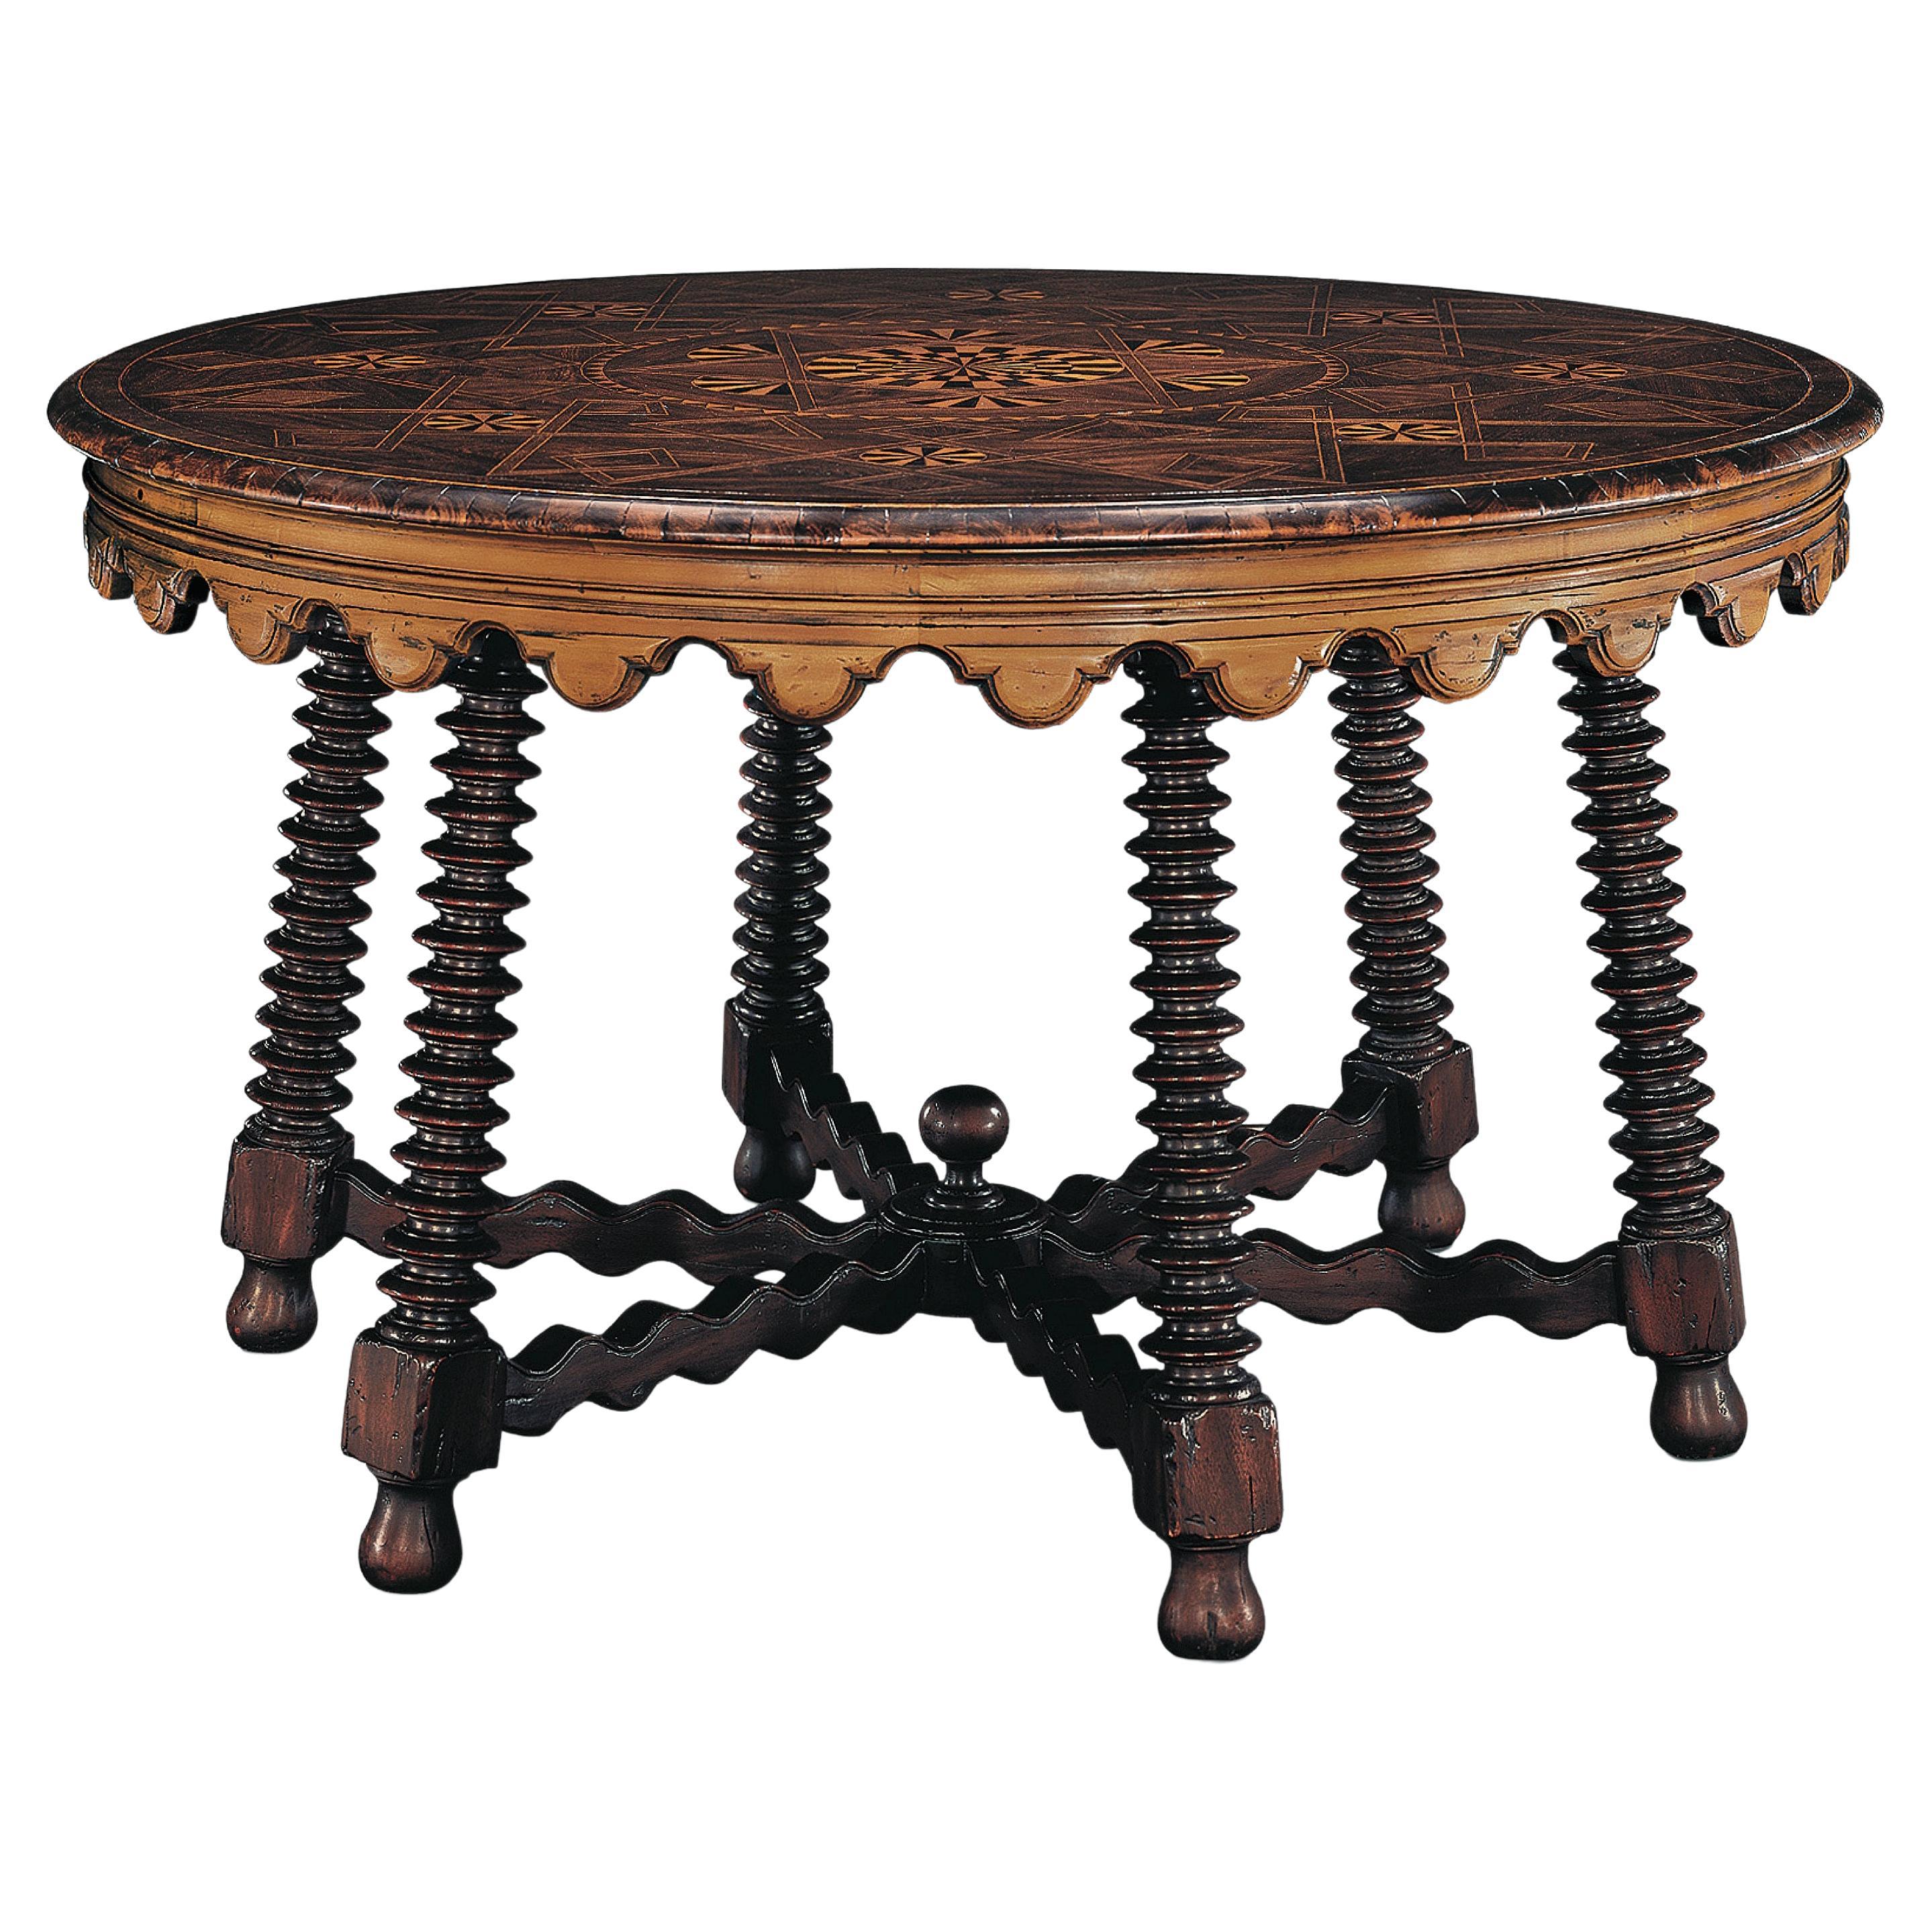 Dominican II sacristy table. Mudejar style dating back to Mexico colonial times For Sale